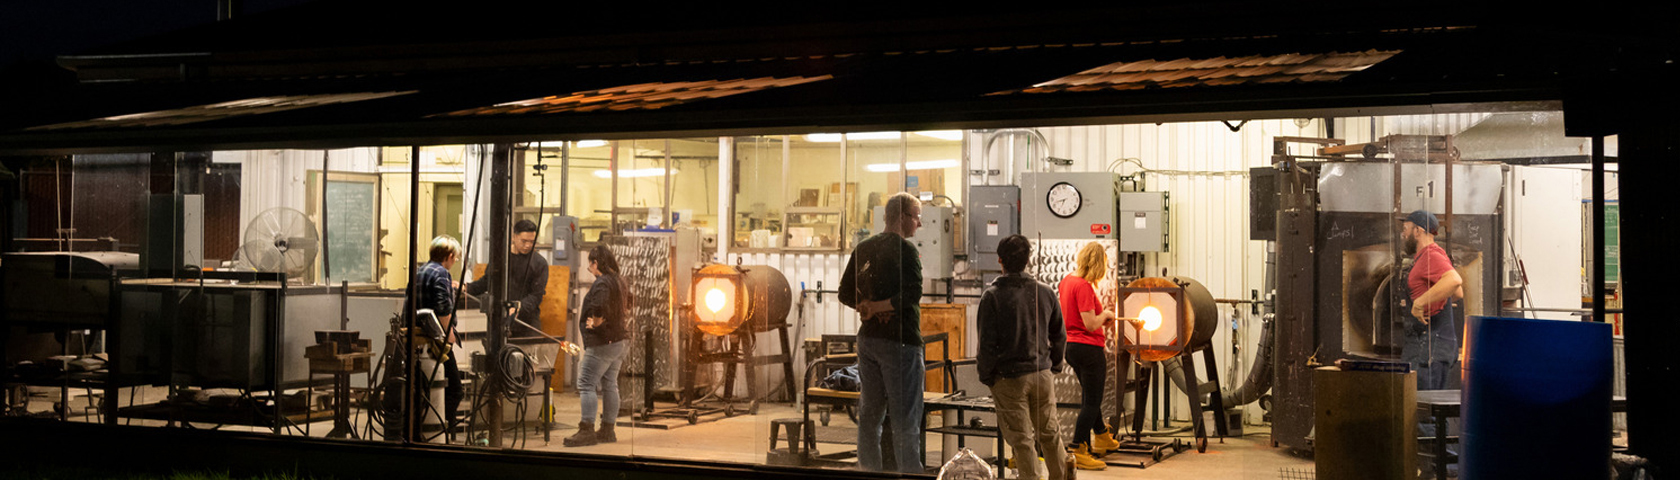 View of glass blowing kilns from outside at night with students blowing glass inside